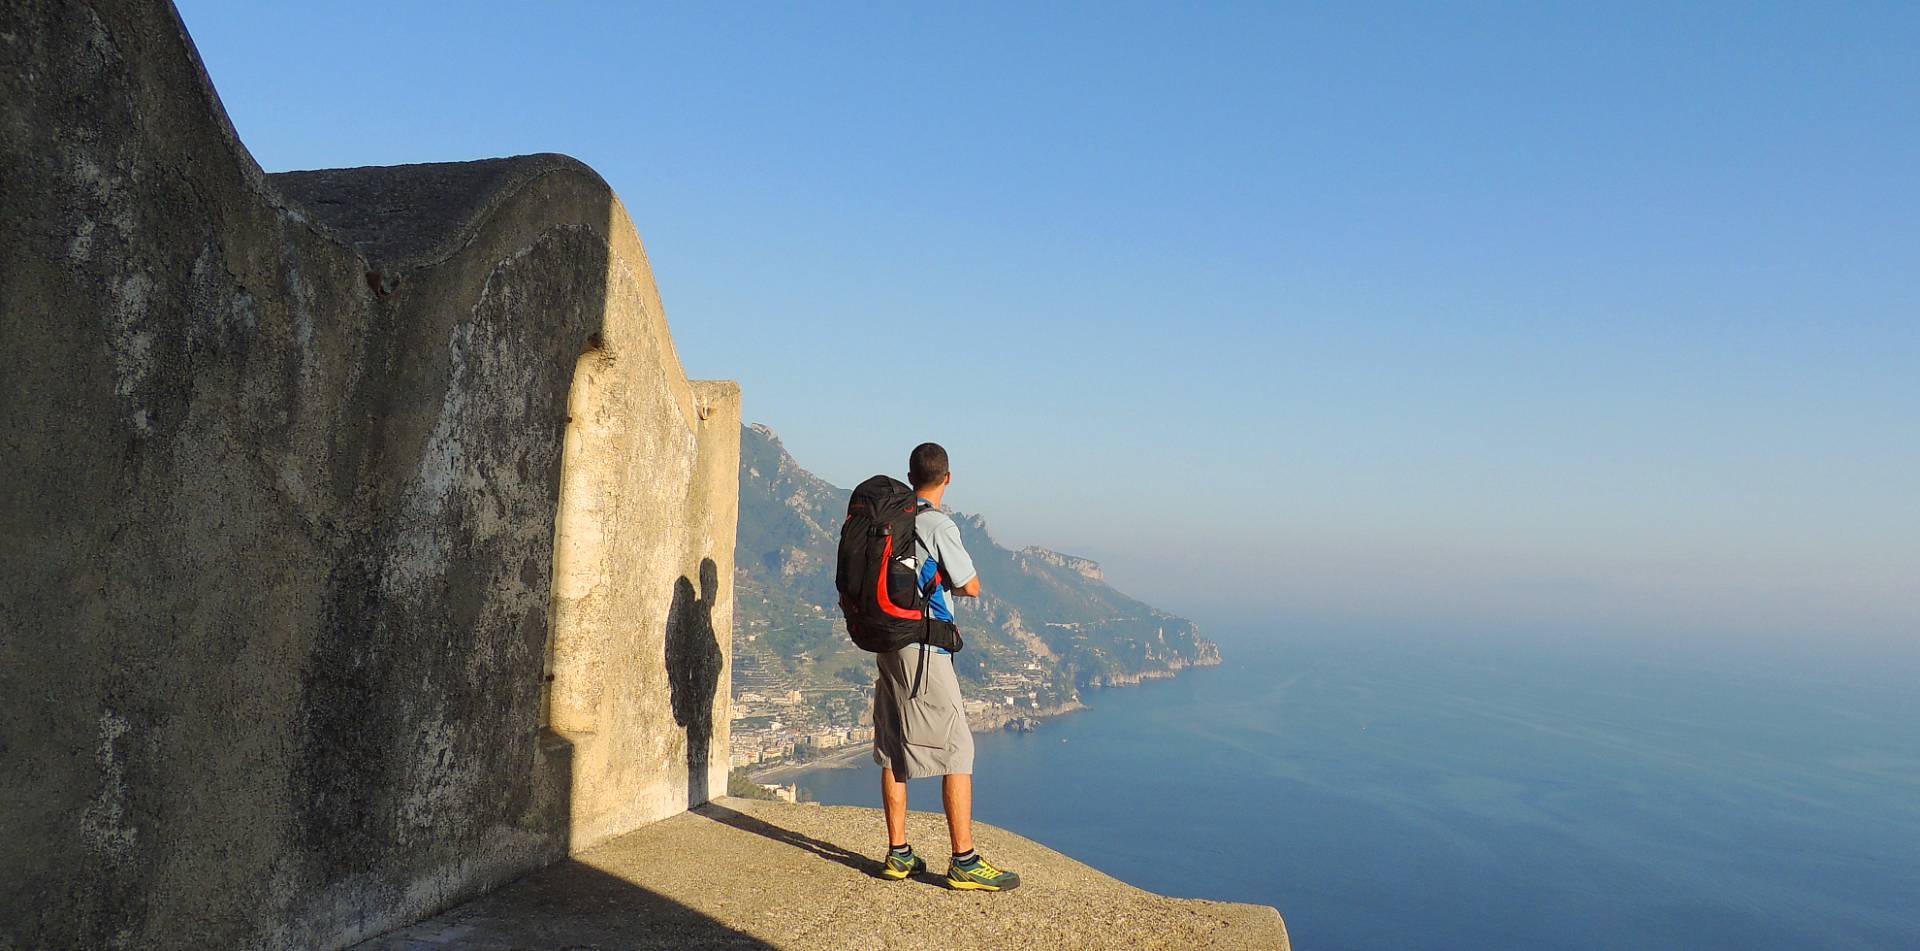 Live the Amalfi Coast from another point of view